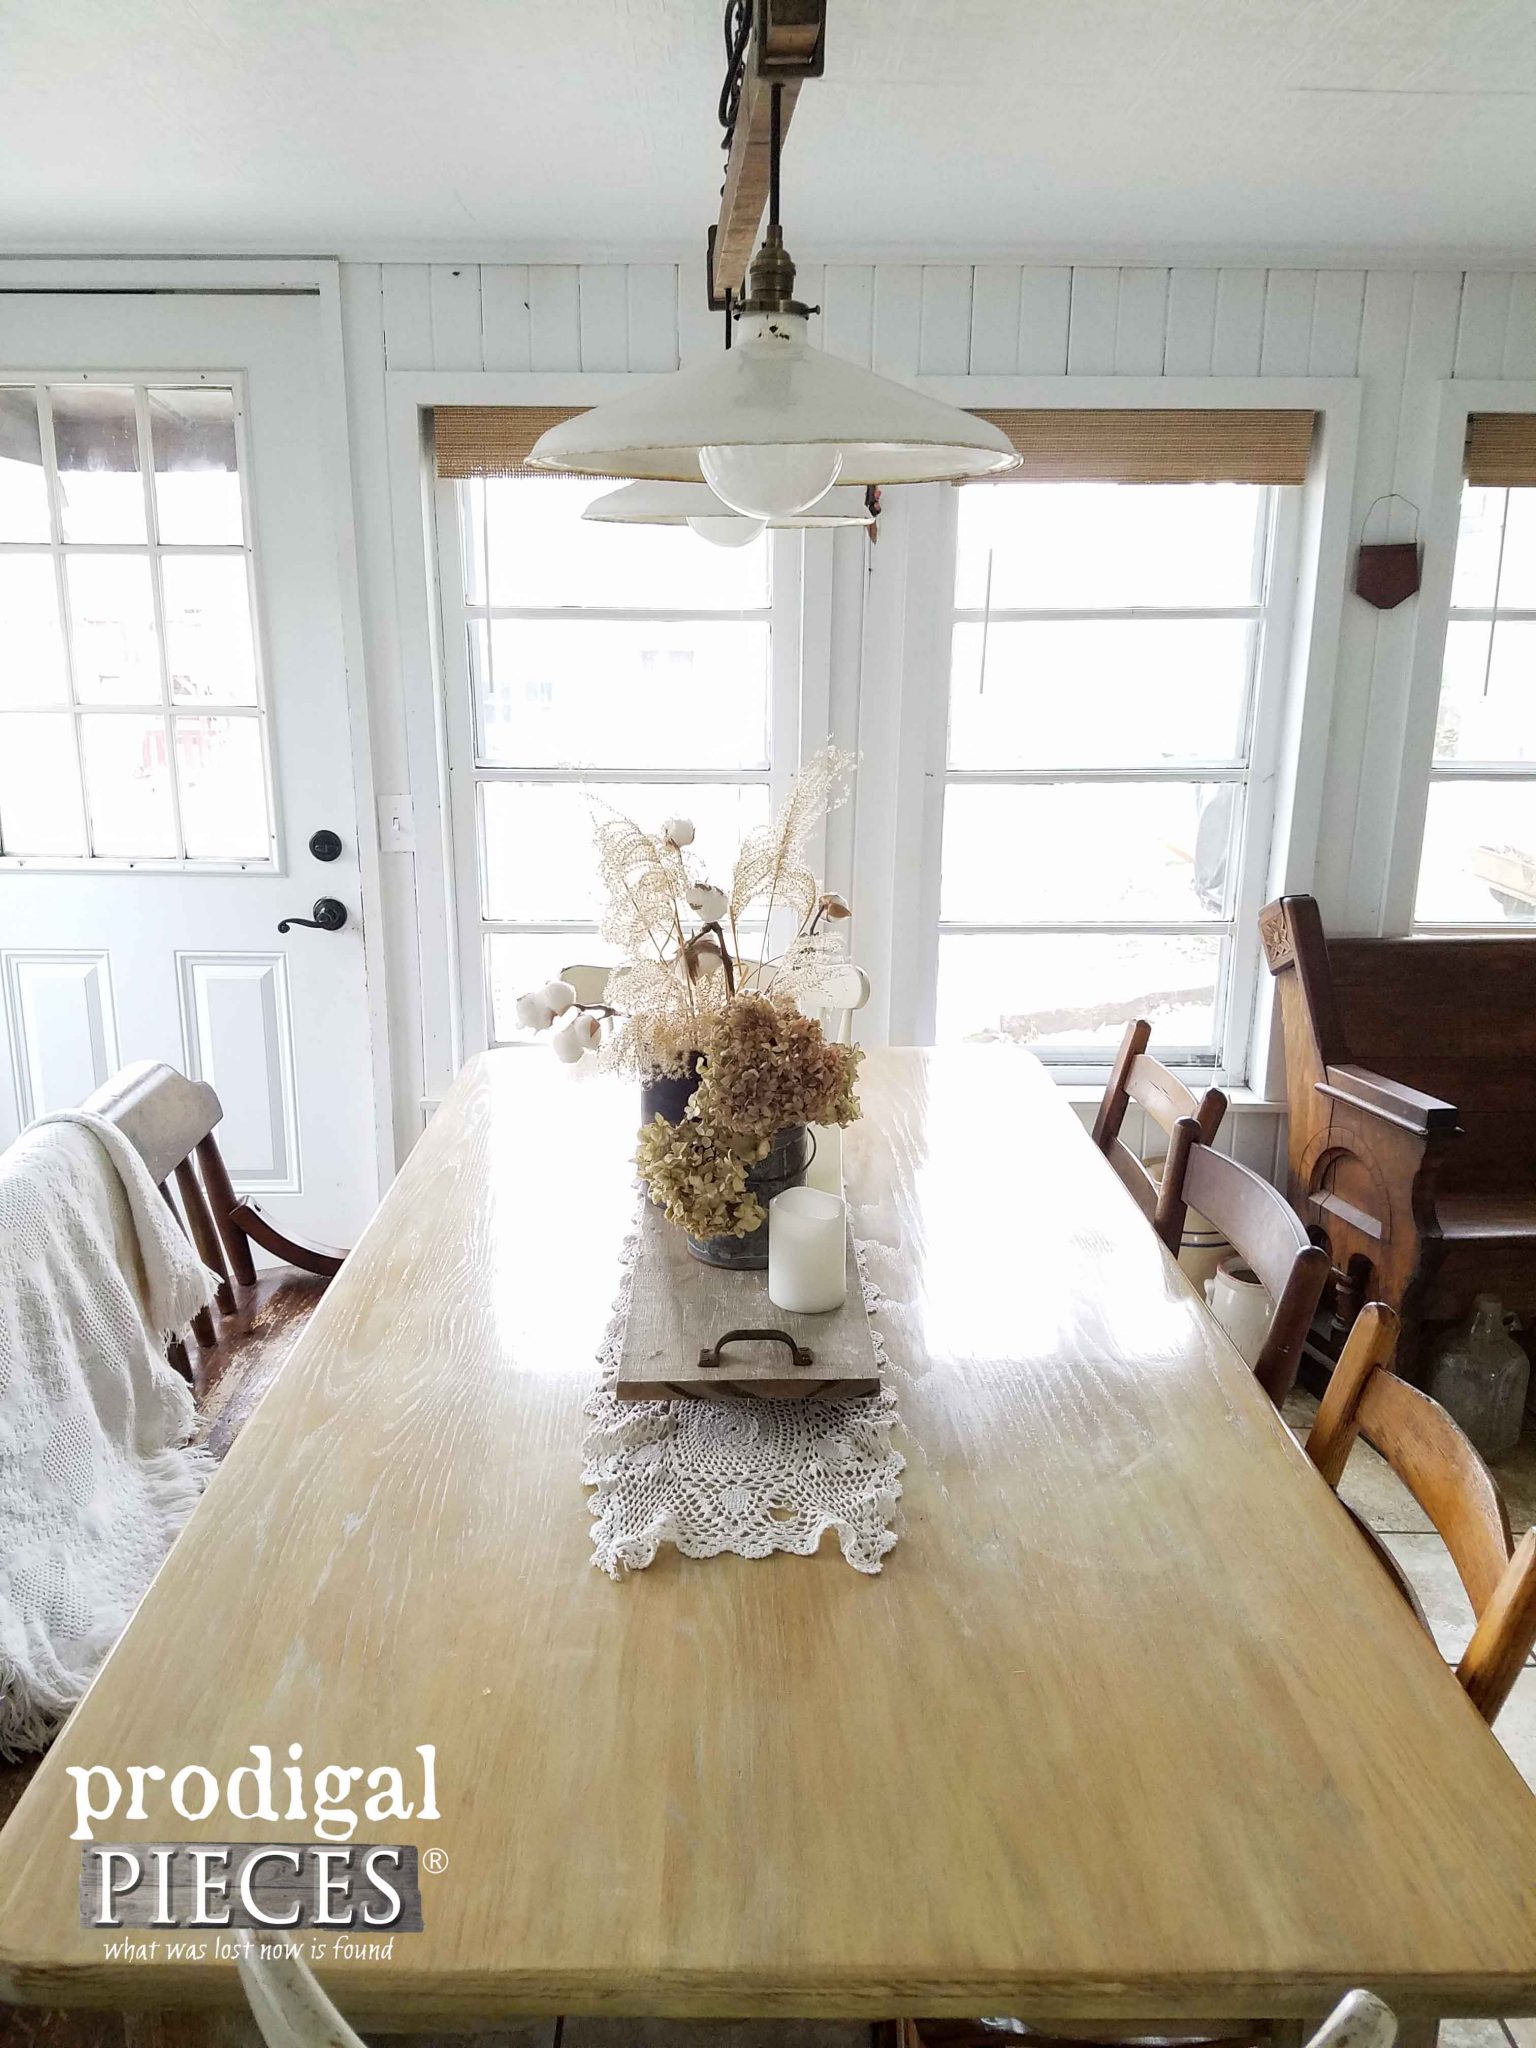 Farmhouse Dining Table with DIY Decor by Prodigal Pieces | prodigalpieces.com